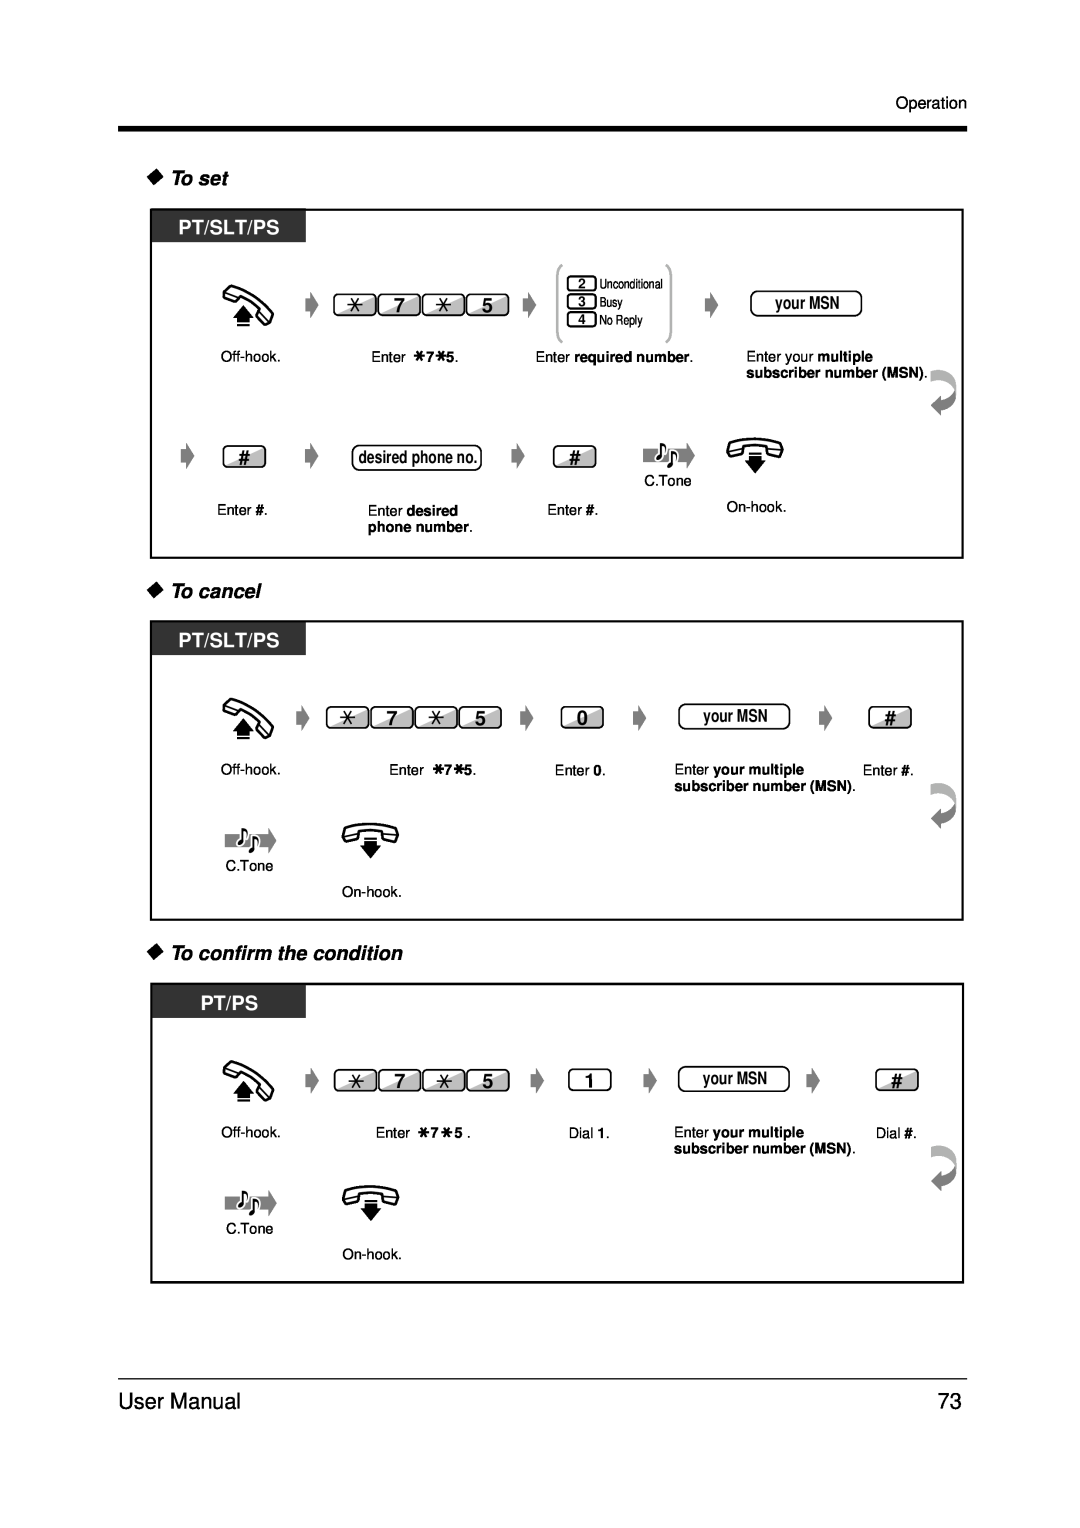 Panasonic KX-TDA200 user manual To set, Pt/Slt/Ps, To cancel, To confirm the condition, Pt/Ps 